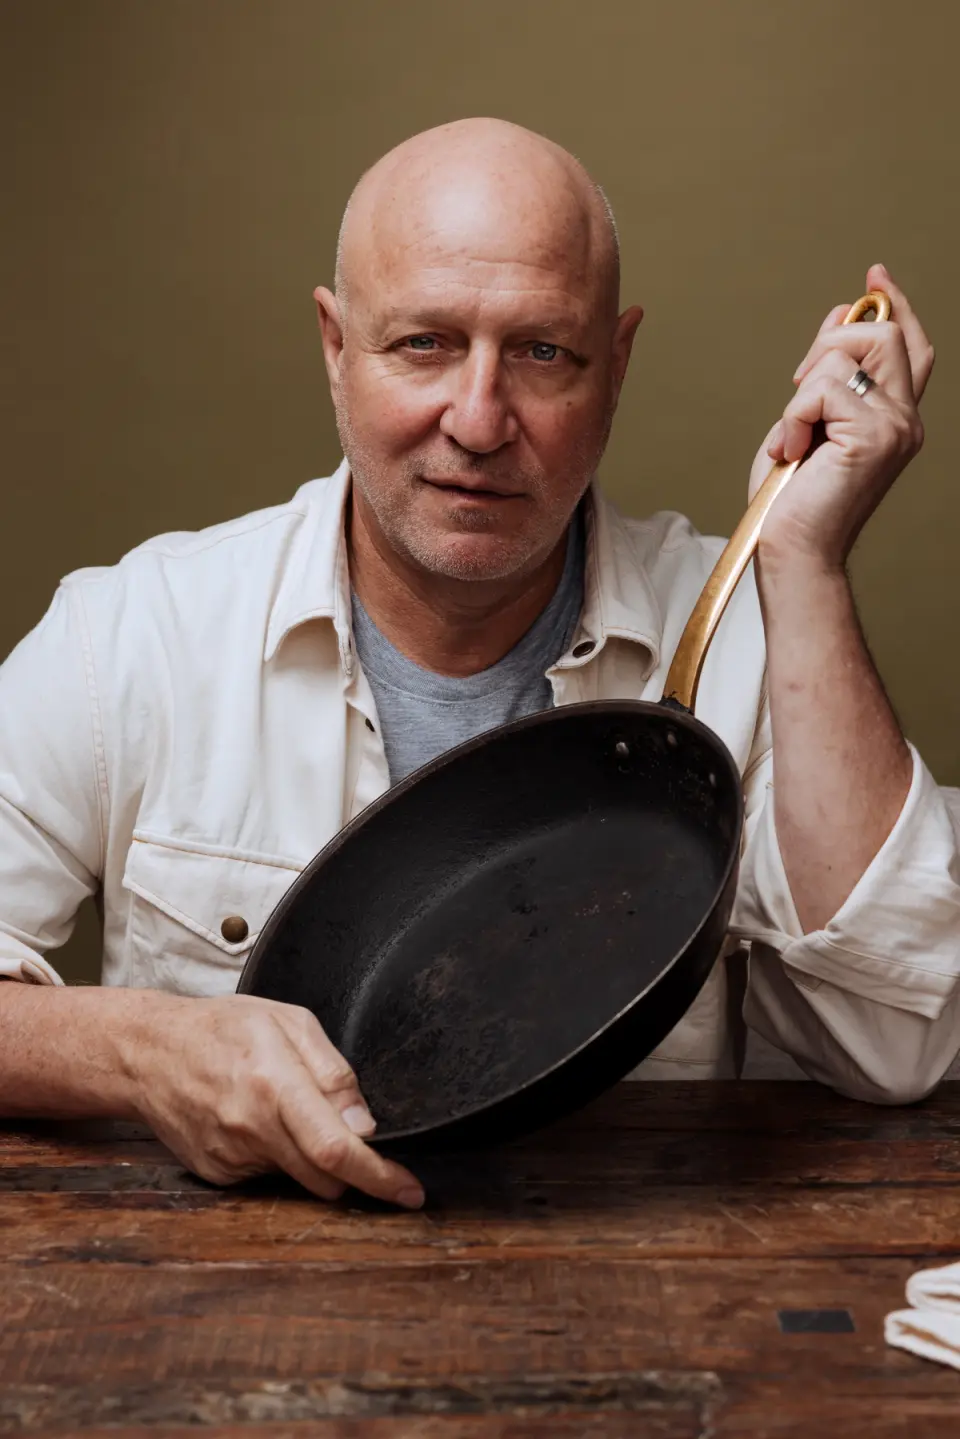 A bald man in a light-colored shirt confidently holds a frying pan while seated at a wooden table against a greenish background.